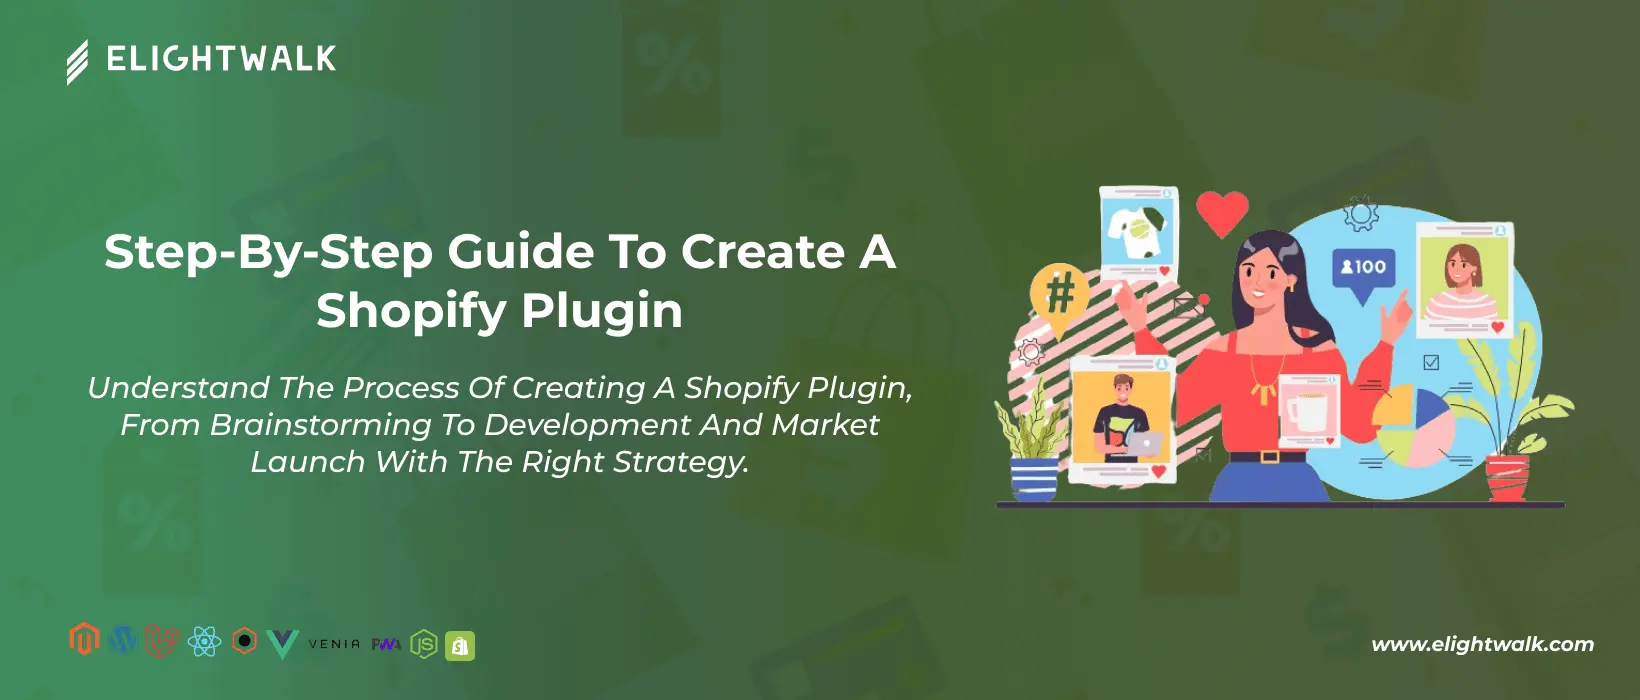 Guide for create Shopify plugins 